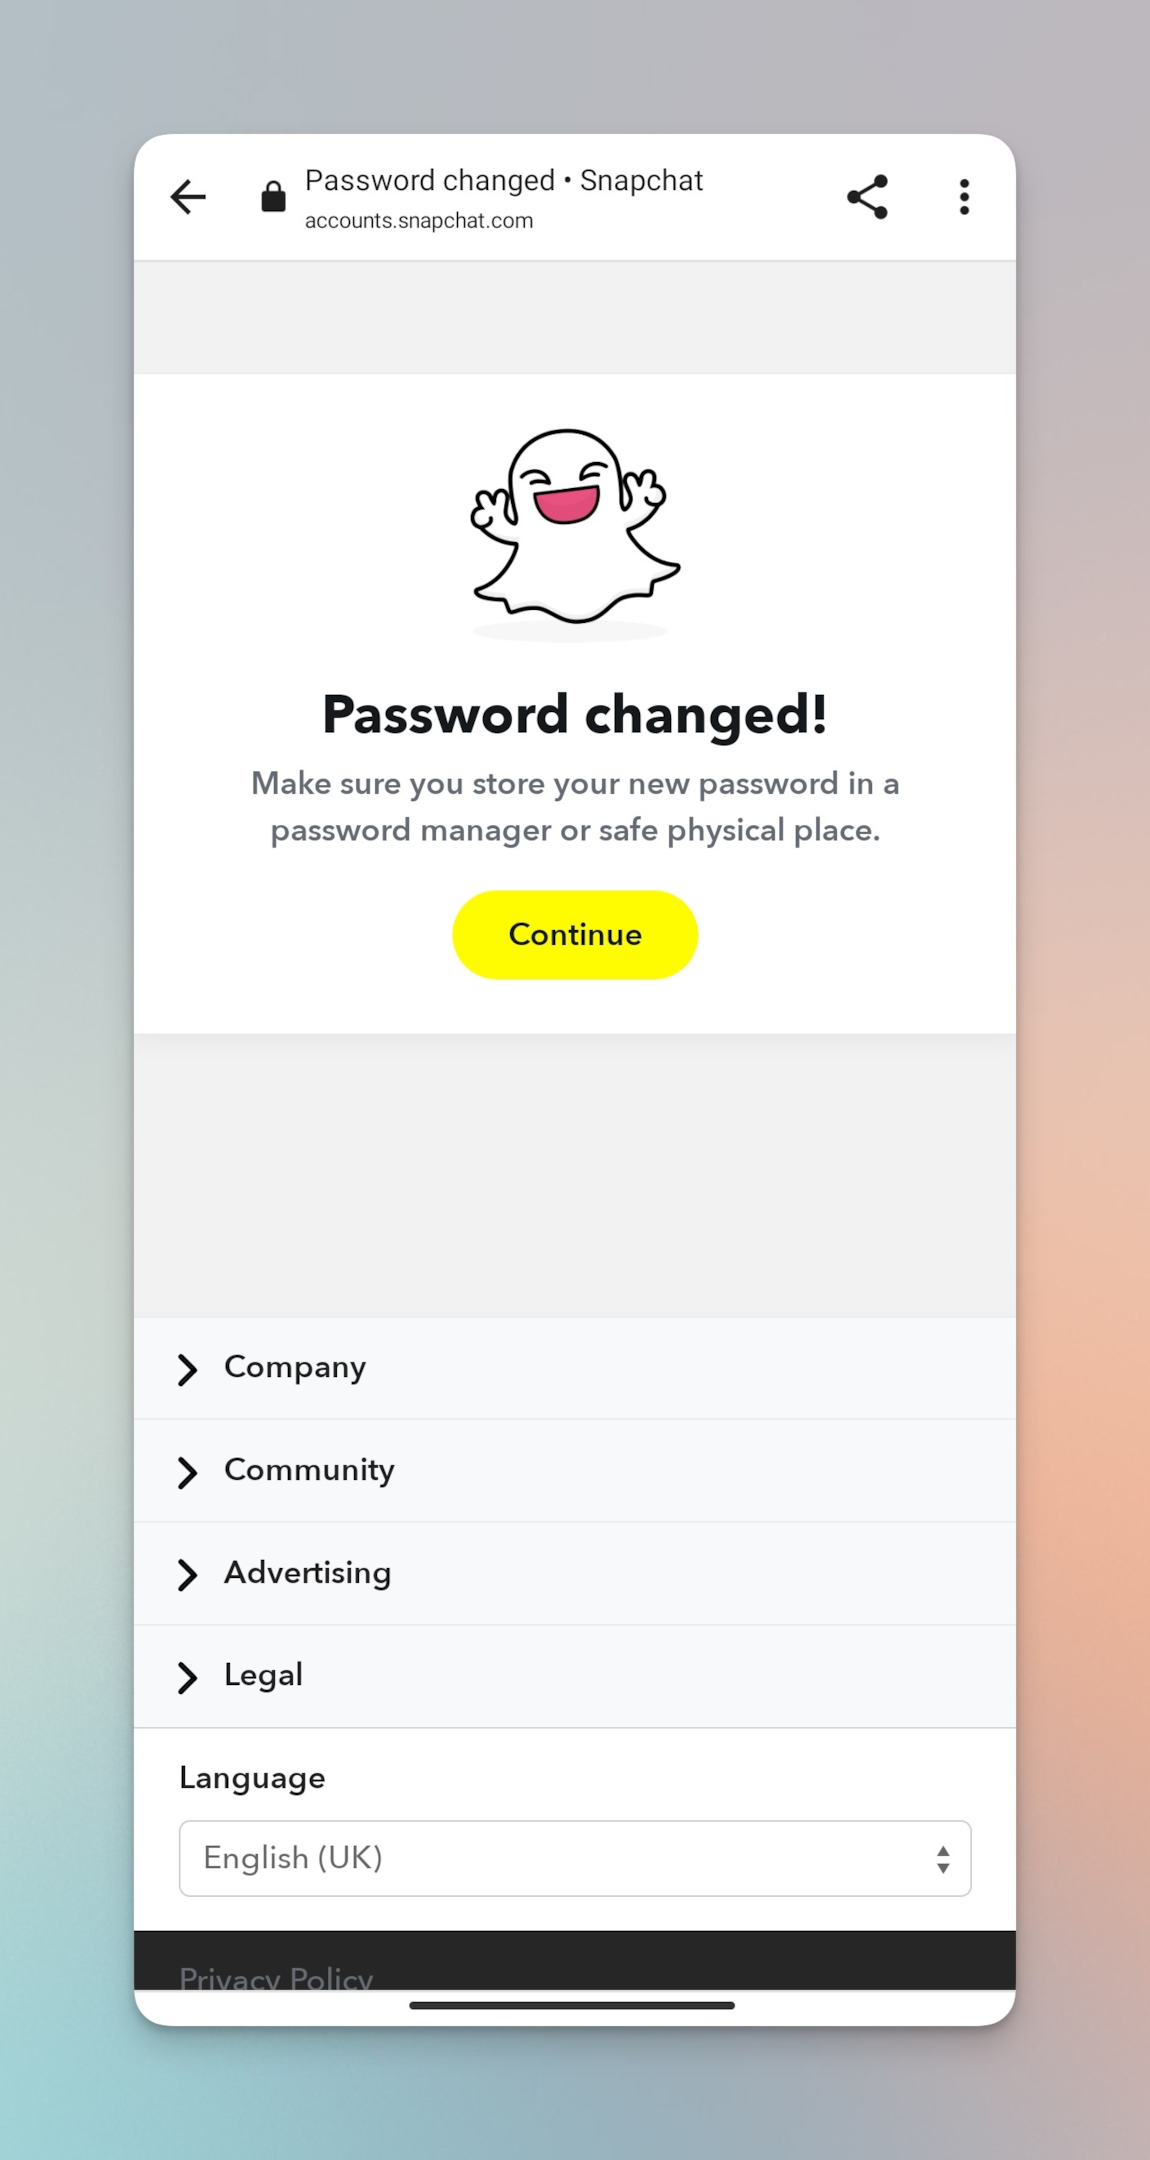 Remote.tools shows a successful password changed screen by Snapchat after resetting the Snapchat password.